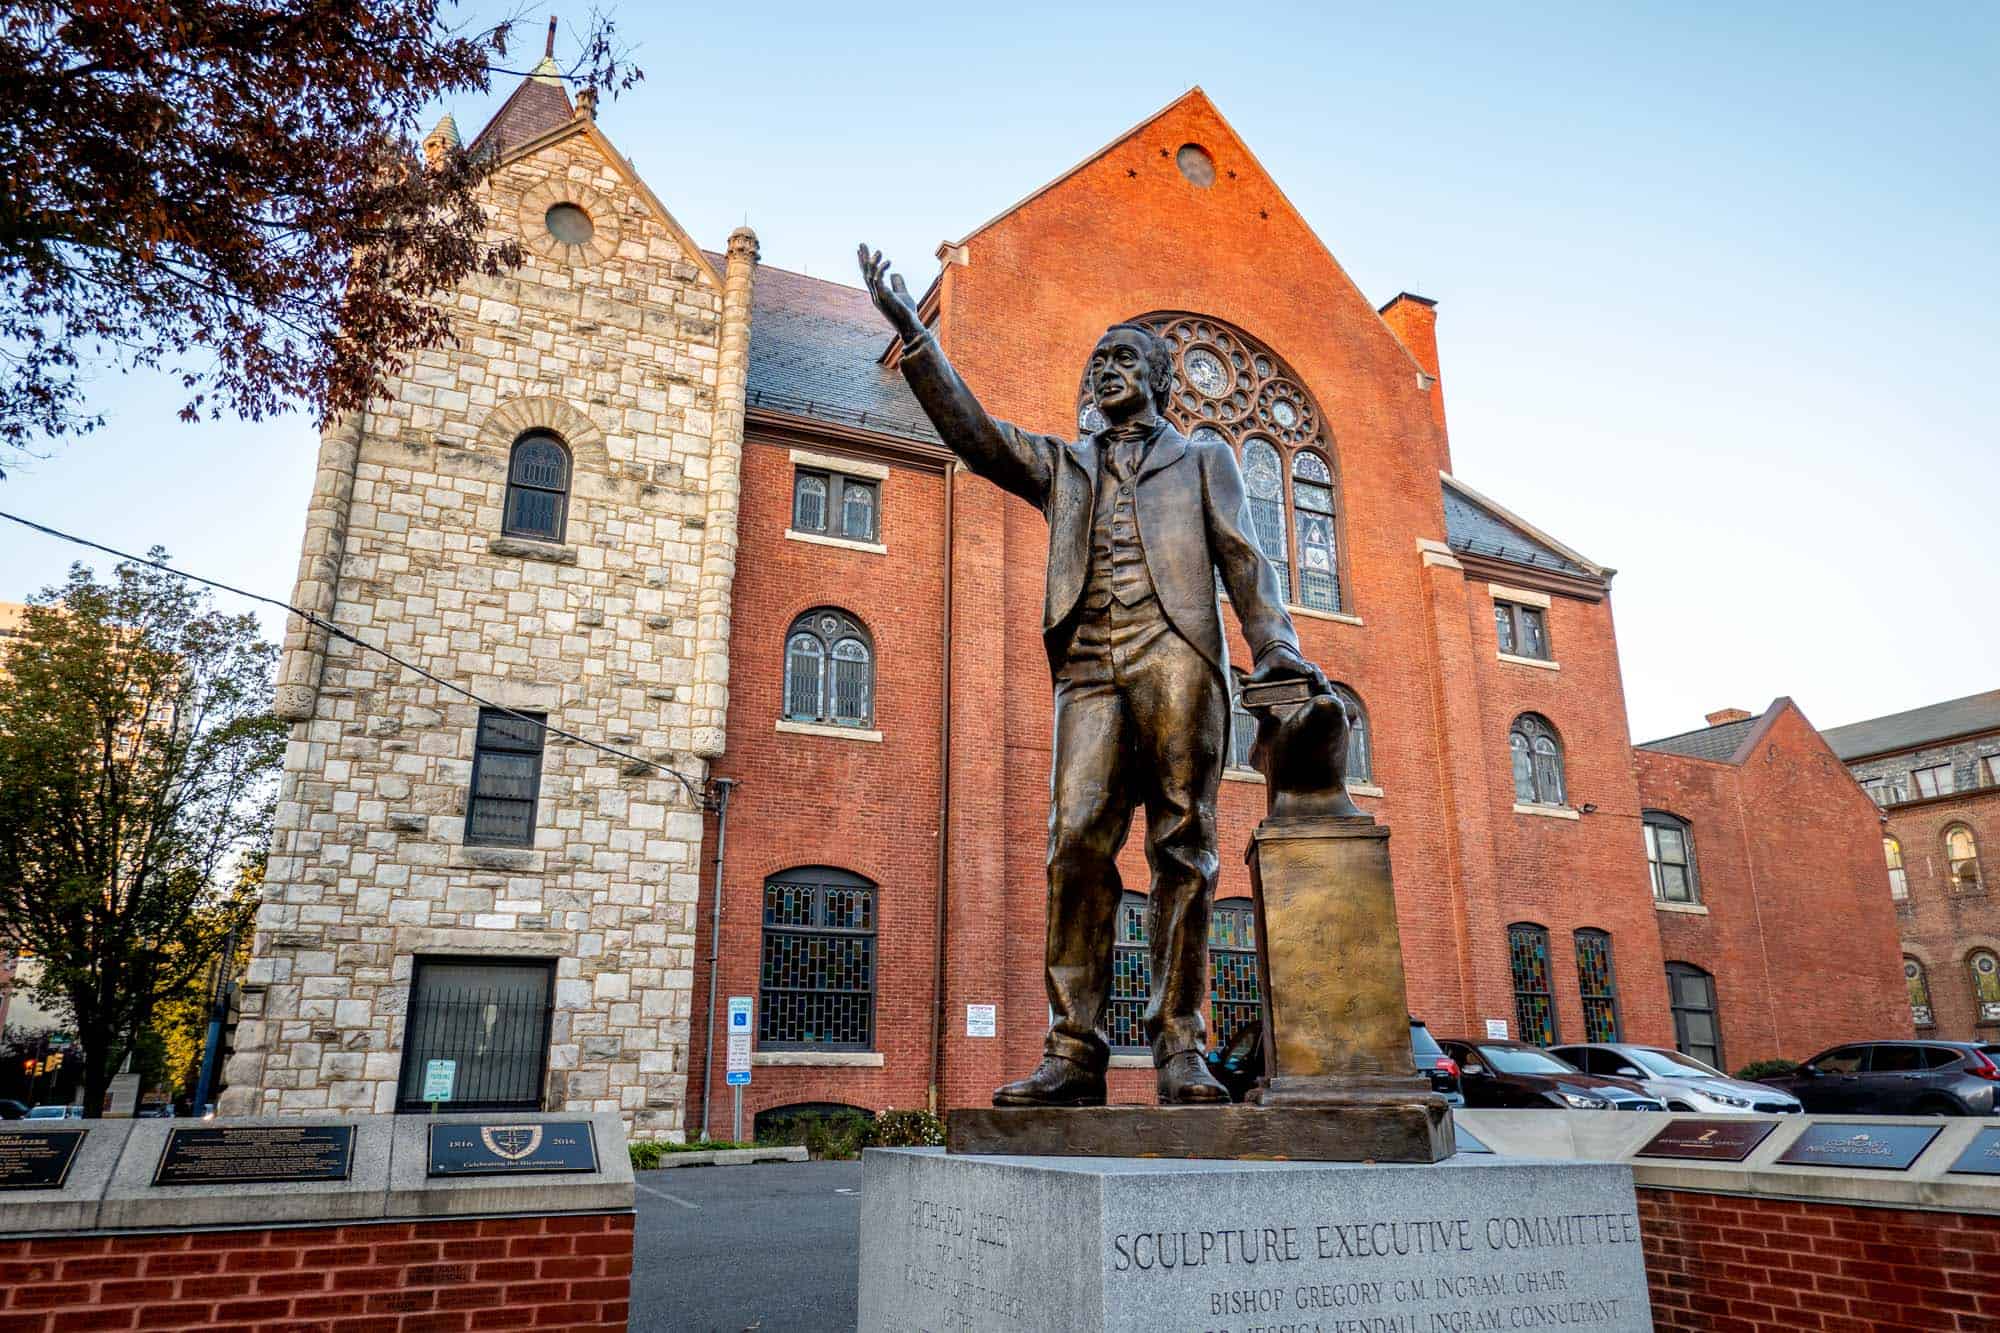 Bronze statue of a man outside a red brick church with stained glass windows